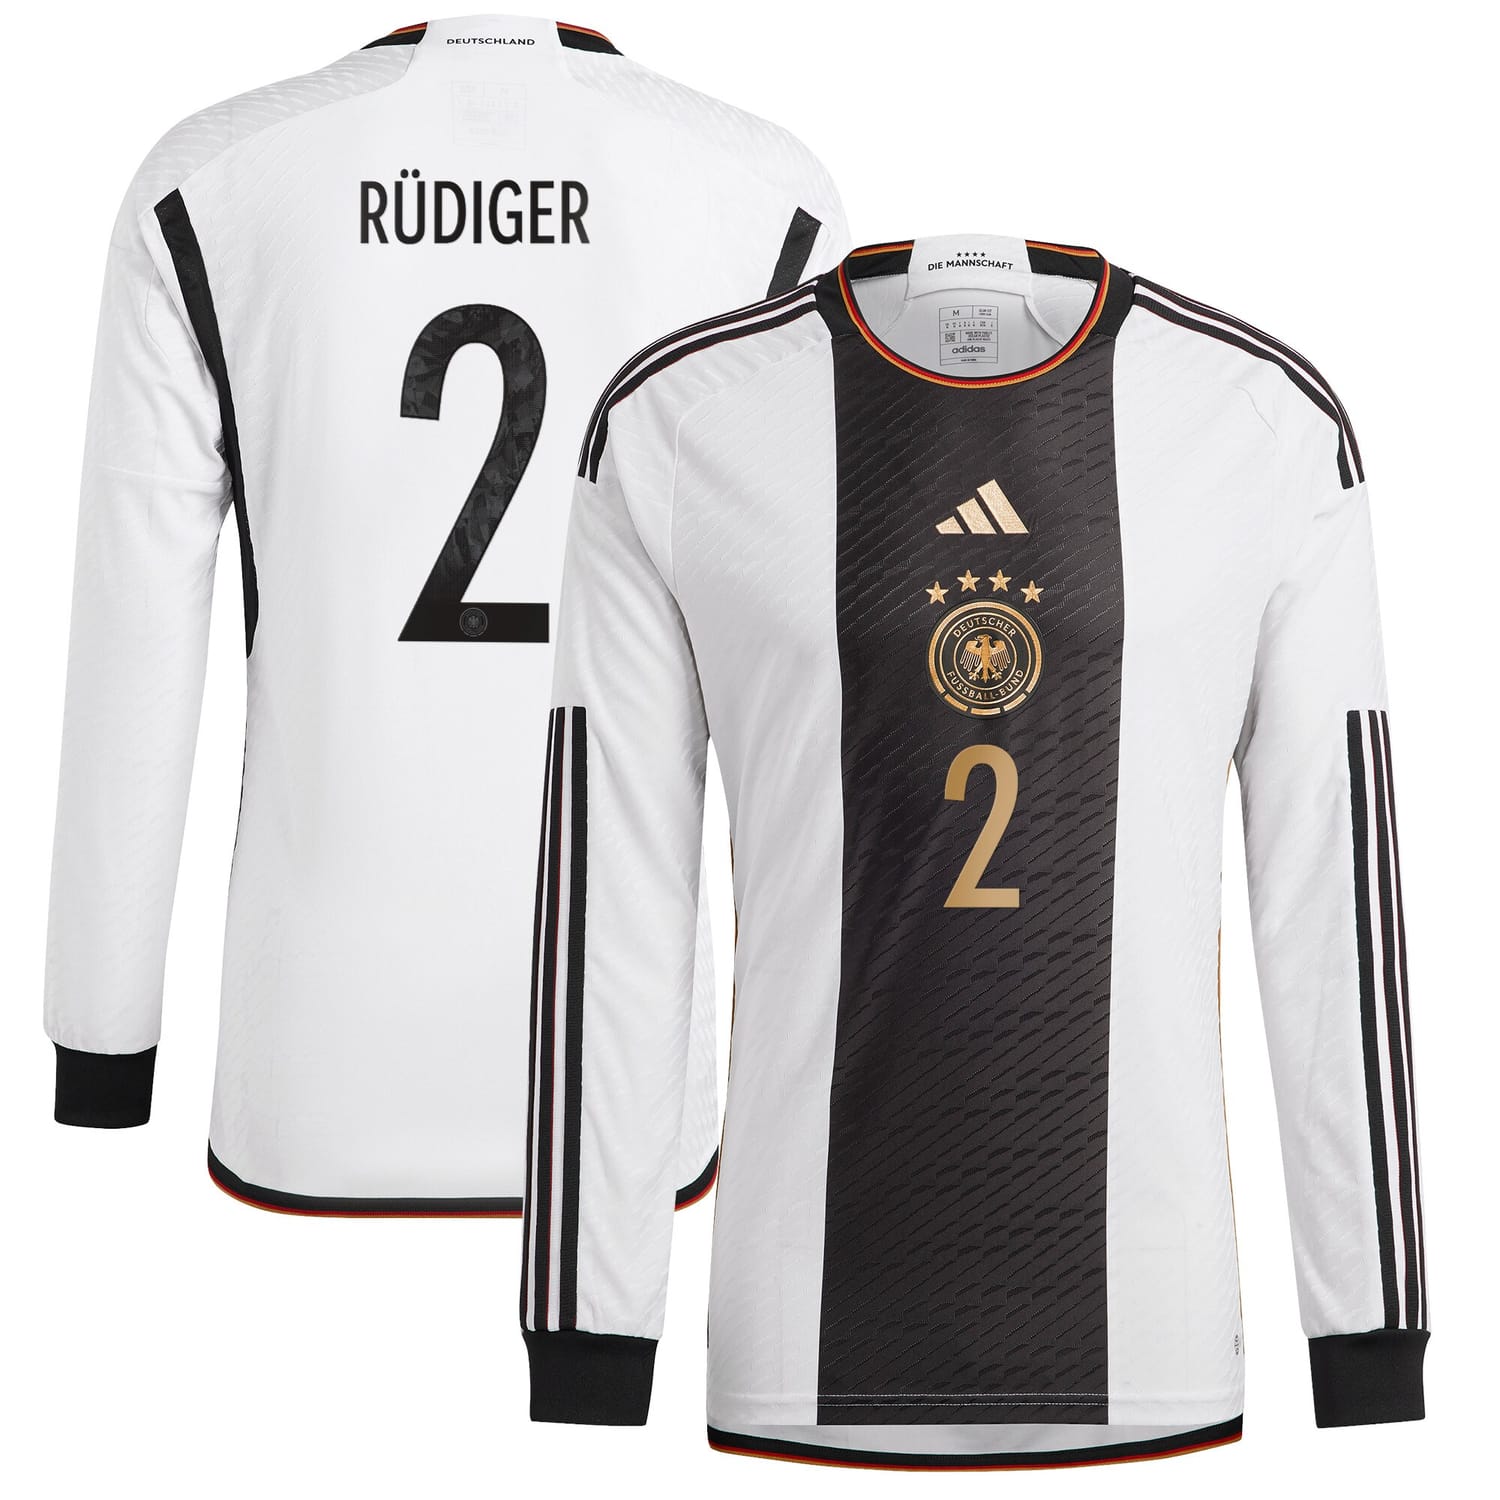 Germany National Team Home Authentic Jersey Shirt Long Sleeve player Antonio Rüdiger 2 printing for Men